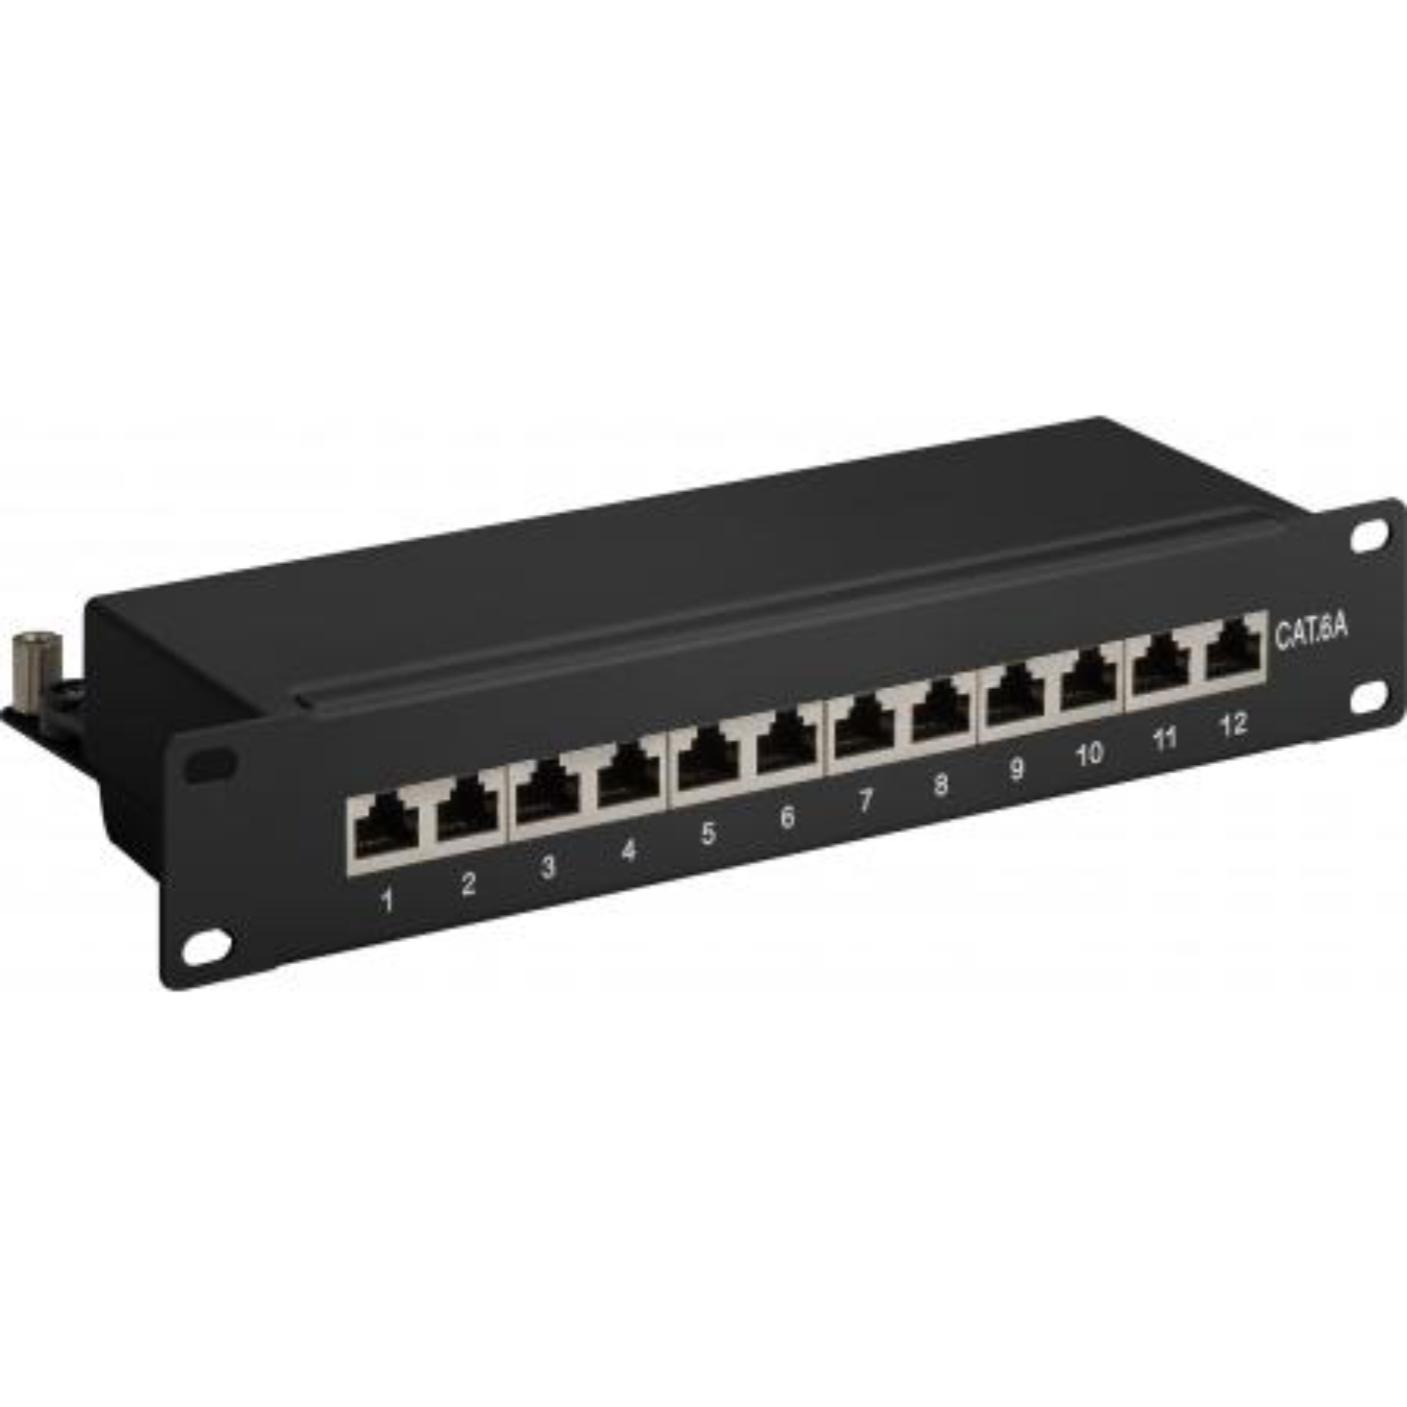 Image of CAT 6a 10inch Patch Panel, 12 Port STP shielded, black - Quality4All